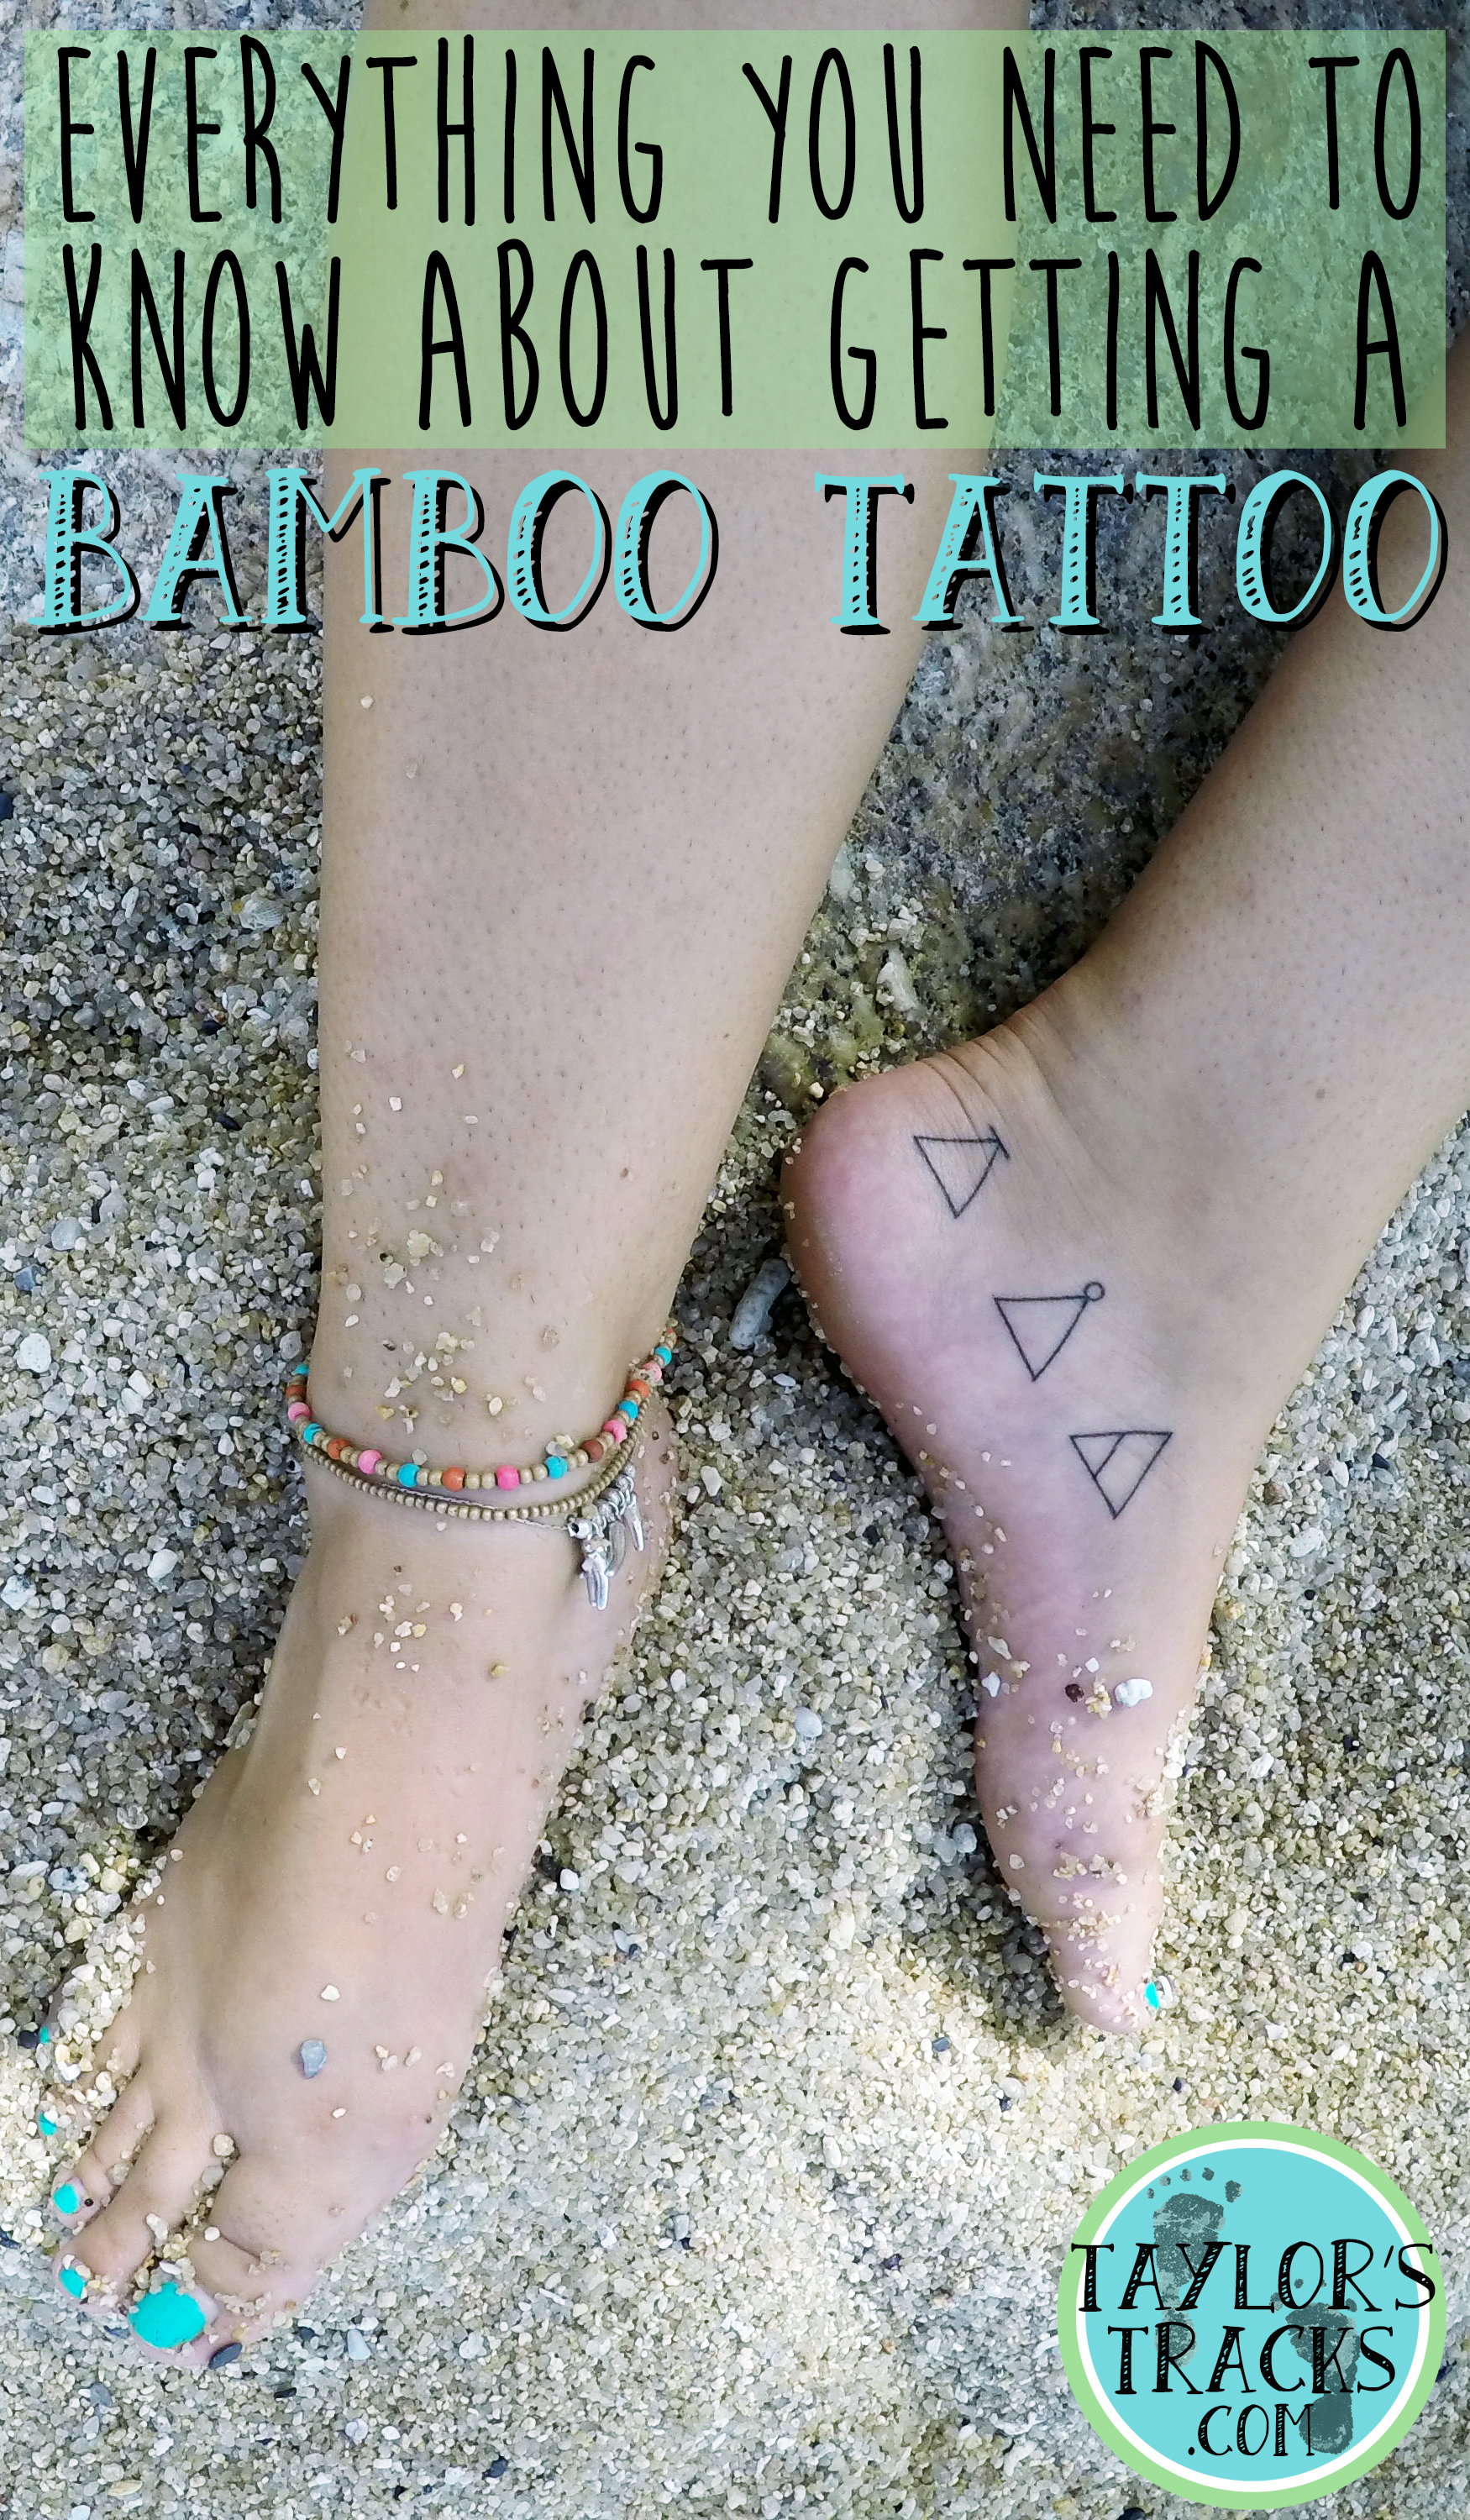 Does bamboo tattoo hurt more